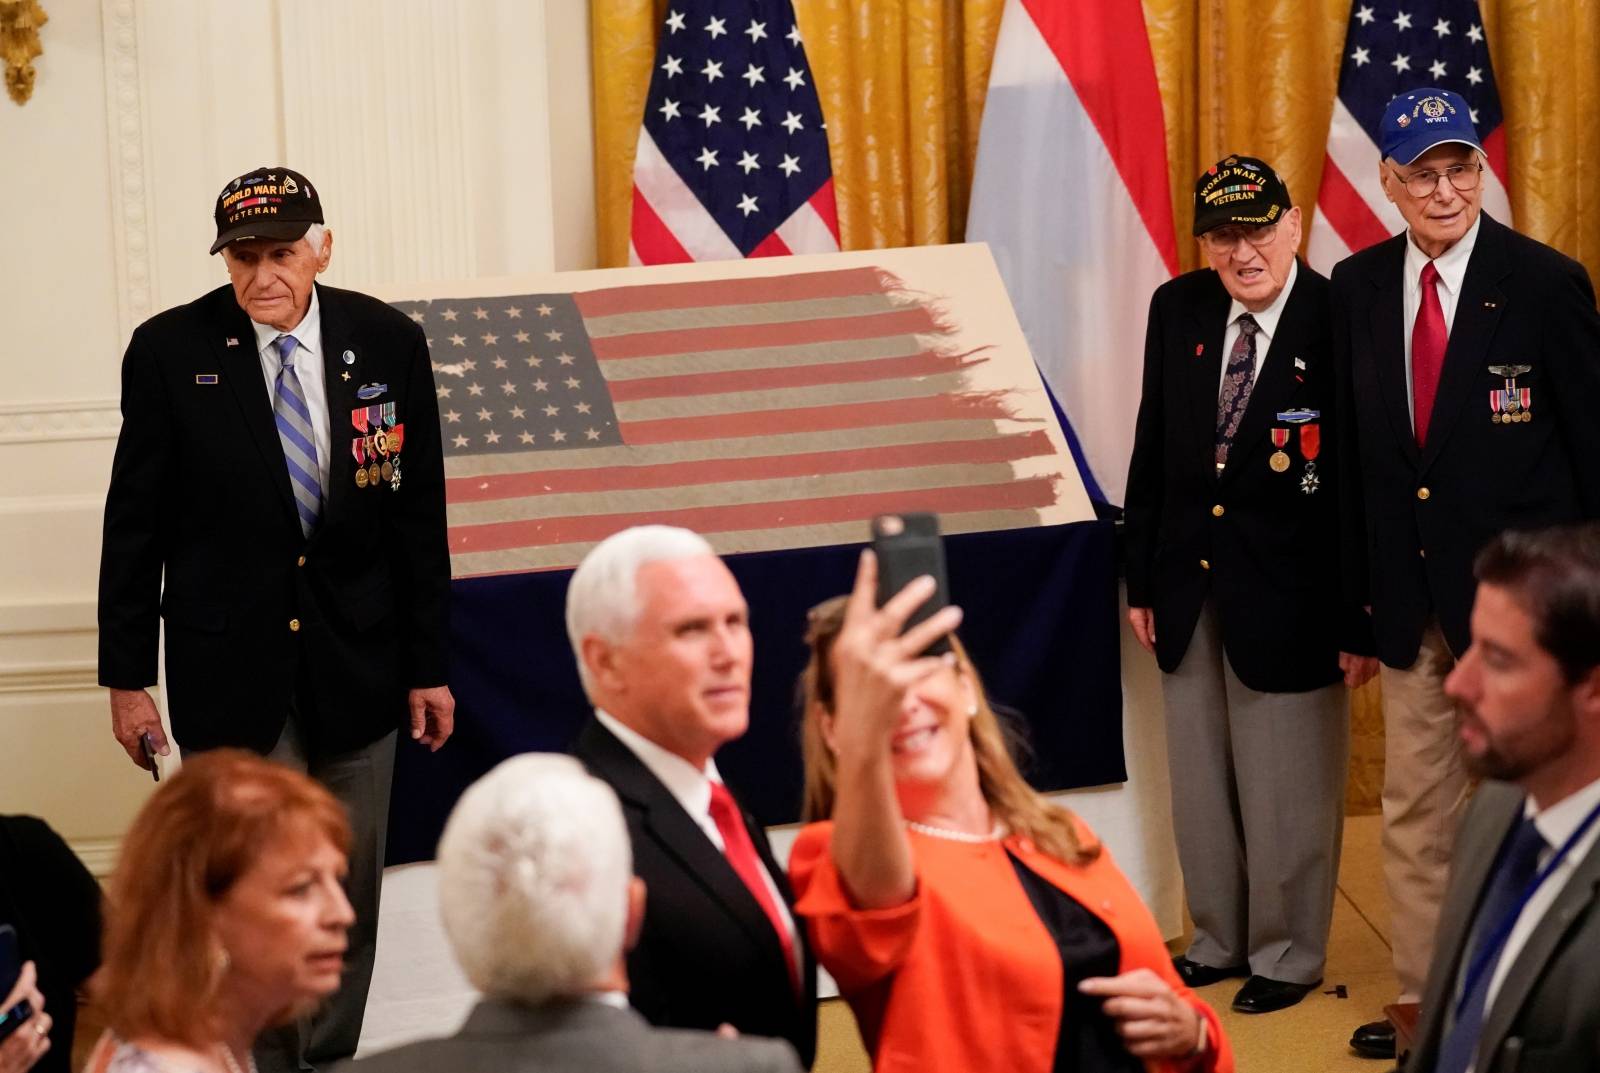 Trump and Netherlands Prime Minister Rutte take part in a flag presentation at the White House in Washington